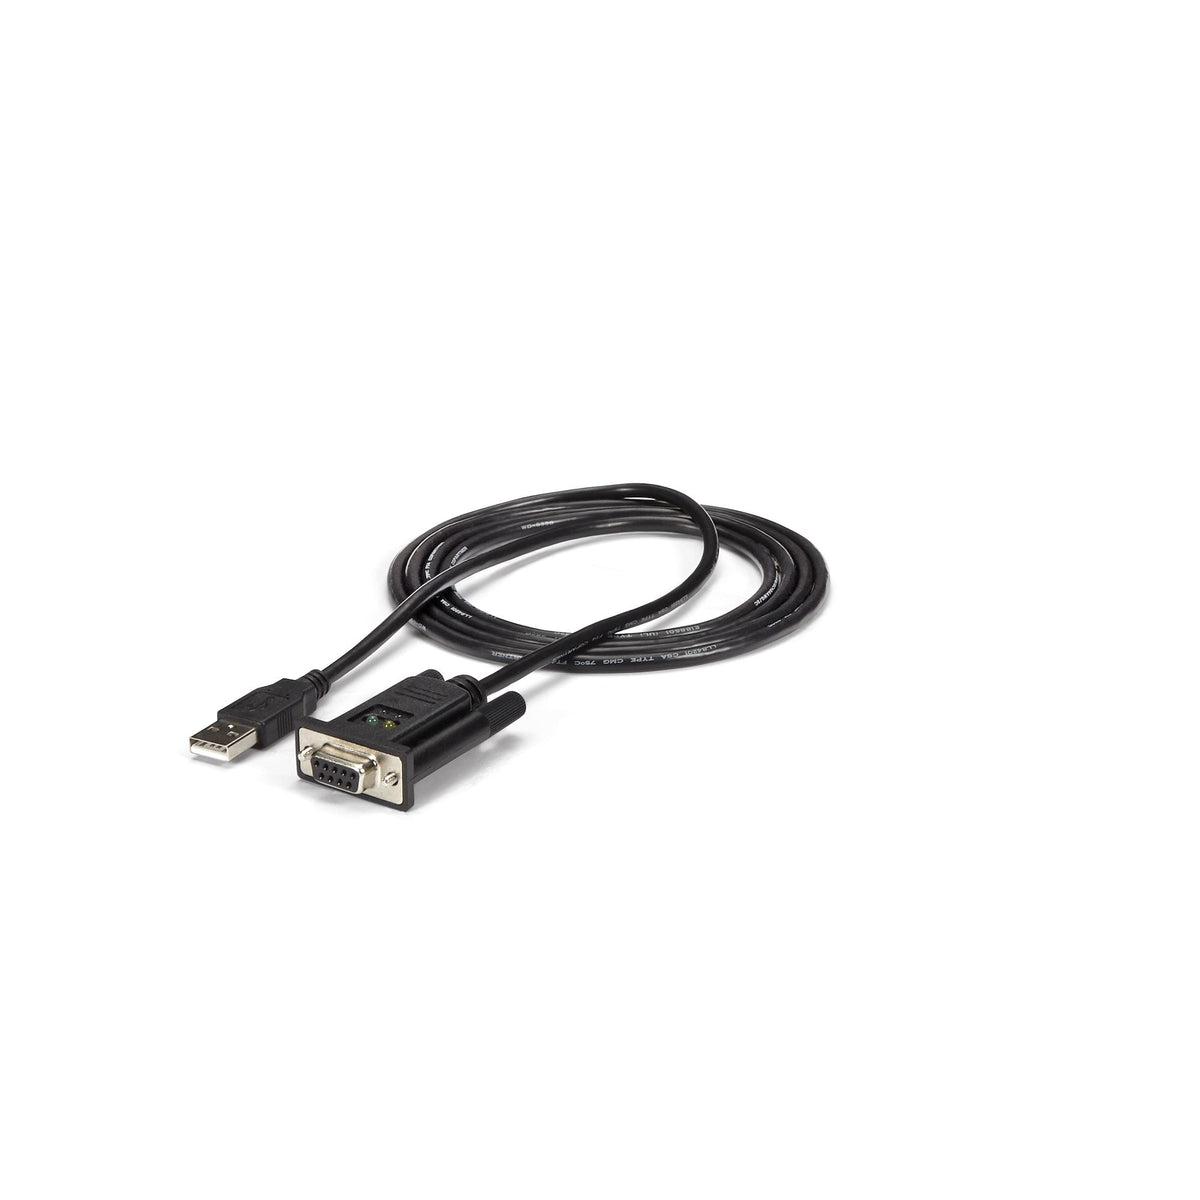 StarTech.com USB to Serial RS232 Adapter - DB9 Serial DCE Adapter Cable with FTDI - Null Modem - USB 1.1 / 2.0 - Bus-Powered